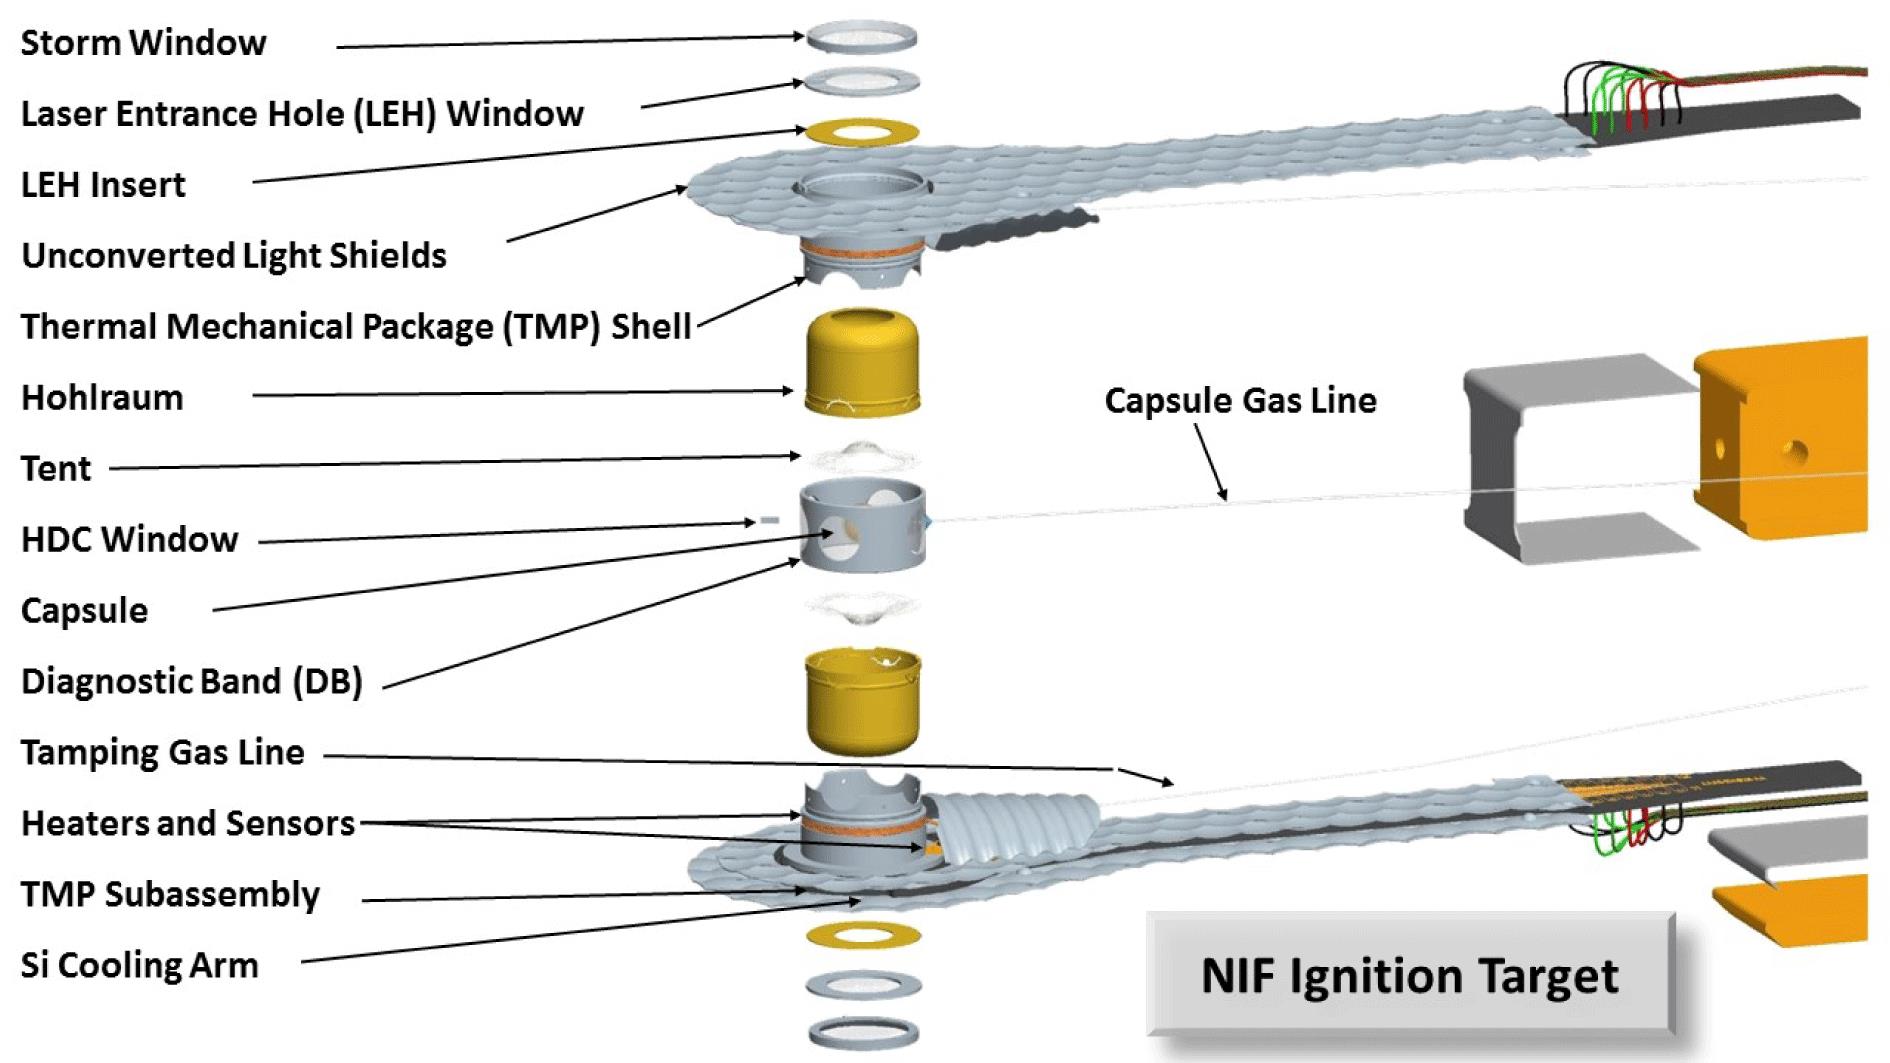 A typical NIF target is shown in an exploded view. The work presented here focuses on the assembly of the HR into the TMP subassembly. Each NIF target requires two of these, one upper and one lower assembly.